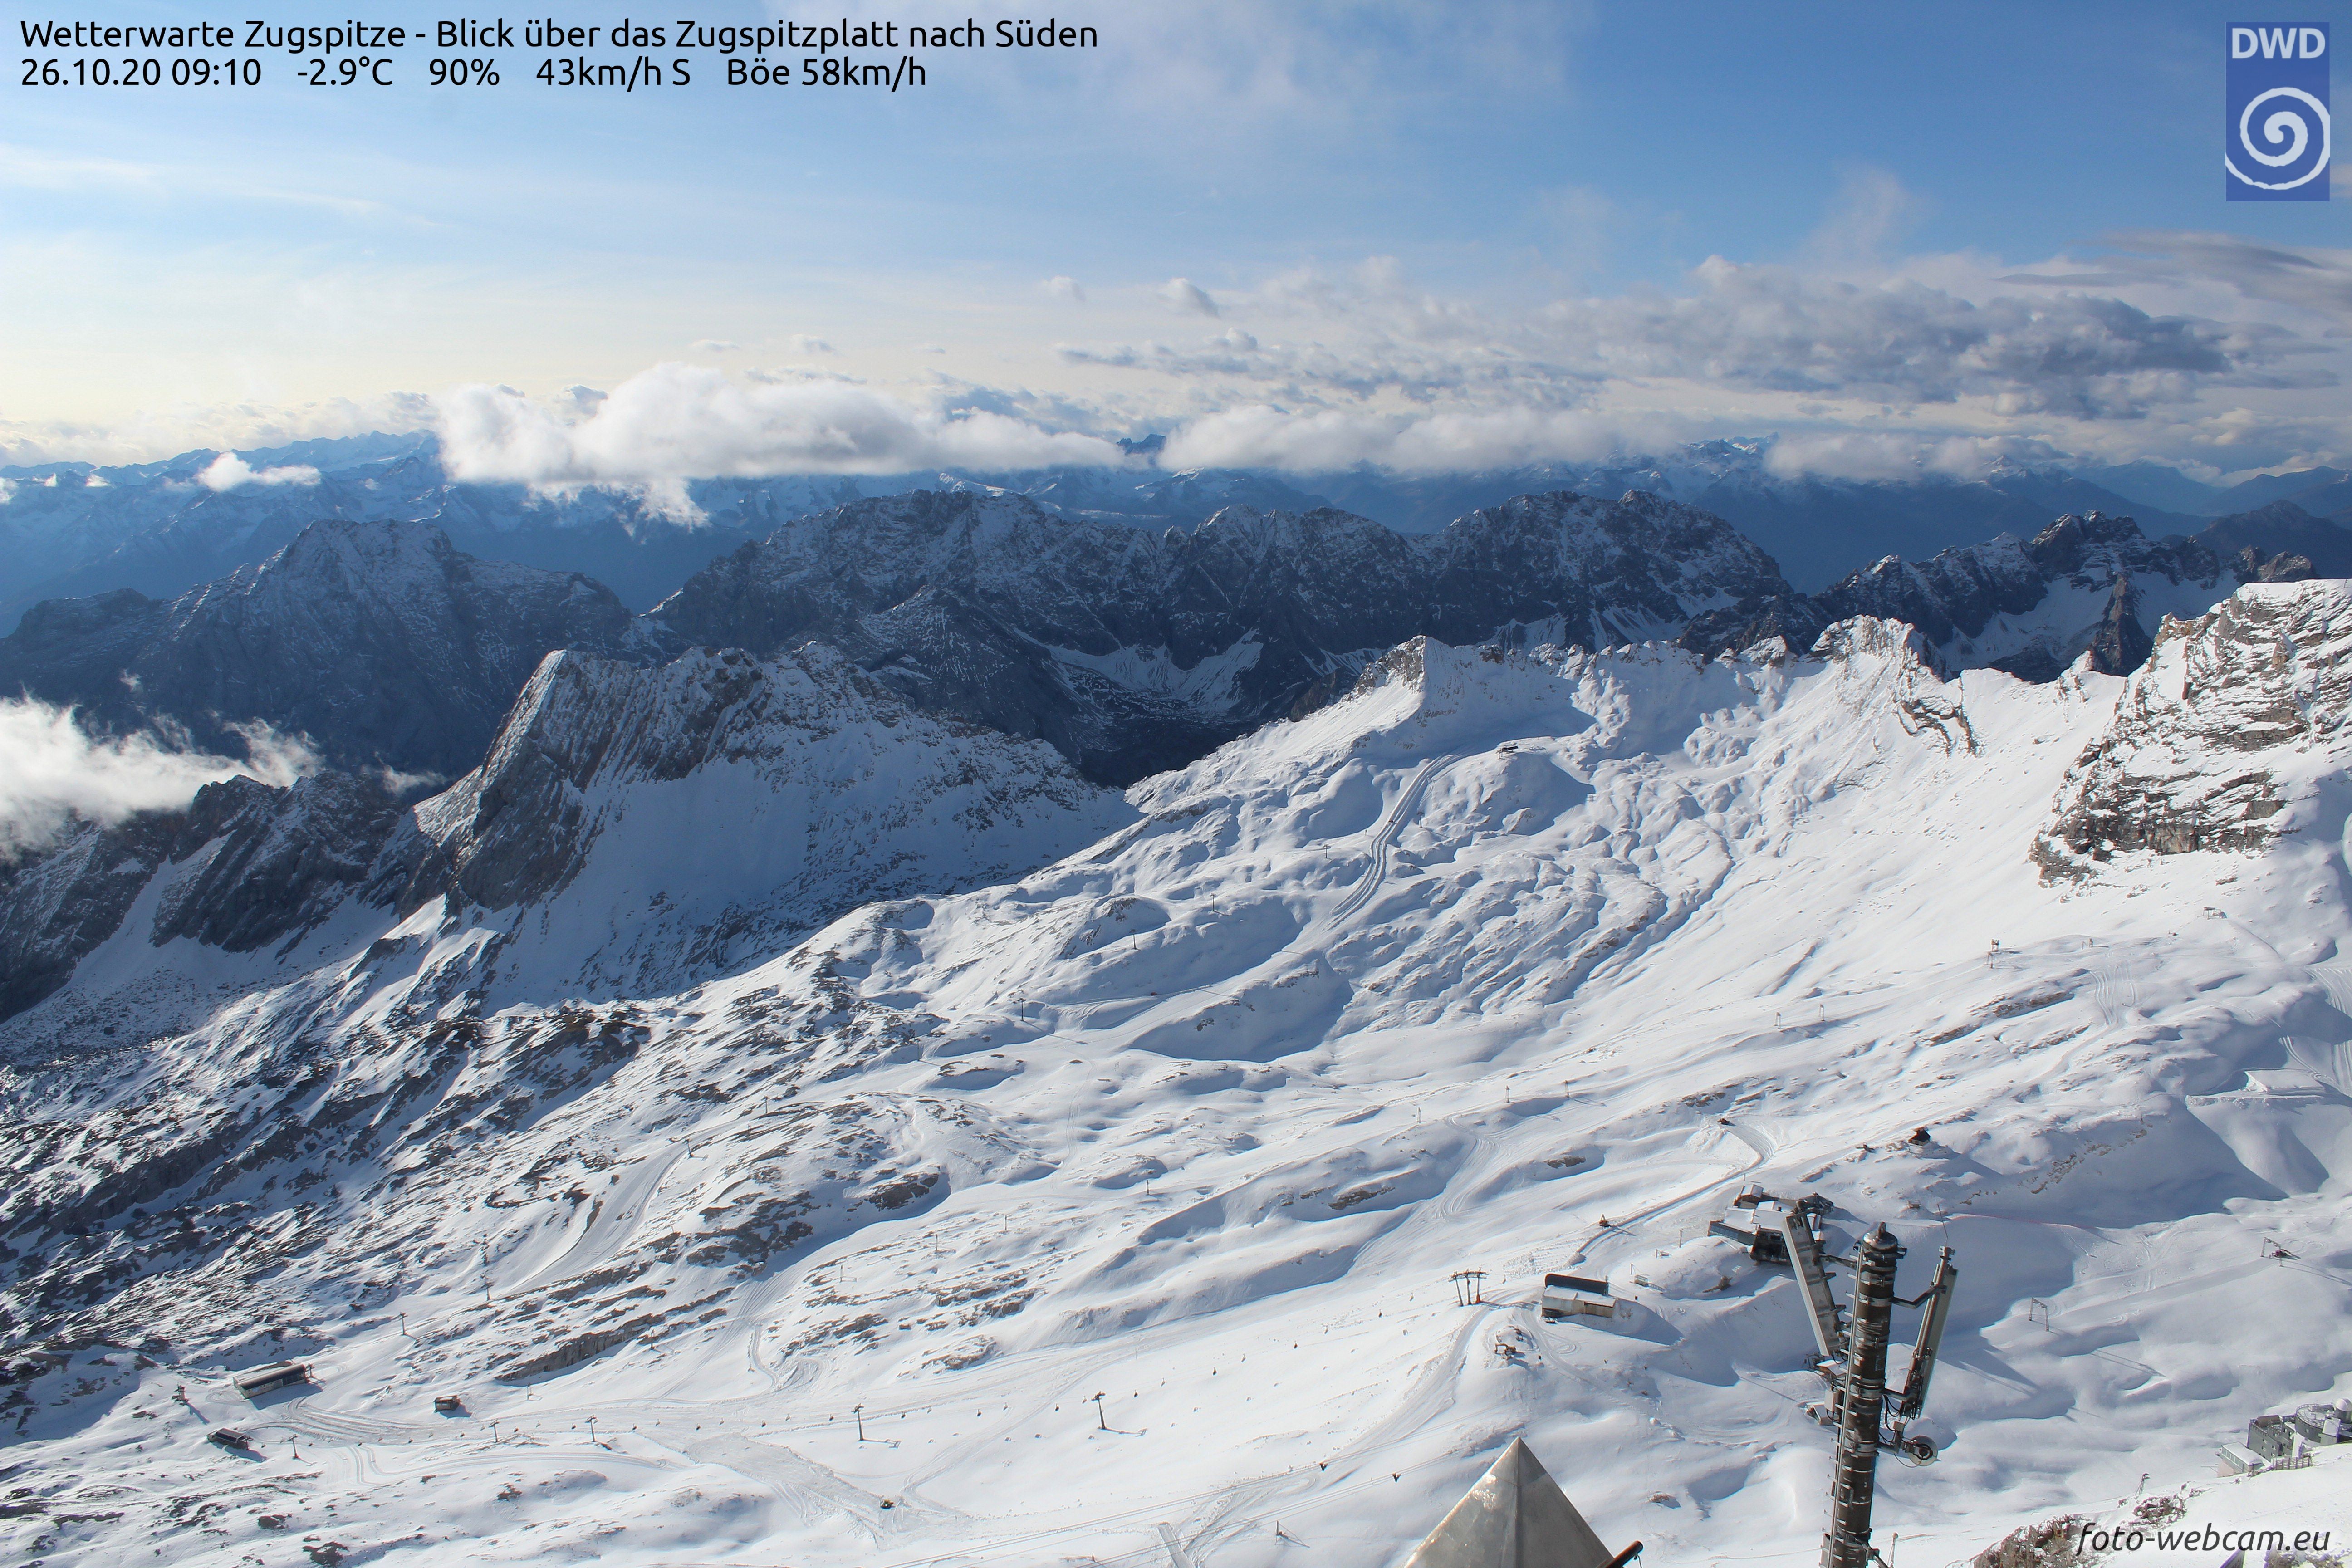 More to the east, like here on the Zugspitze, it will remain dry and mostly sunny this morning. The clouds will come in during the afternoon